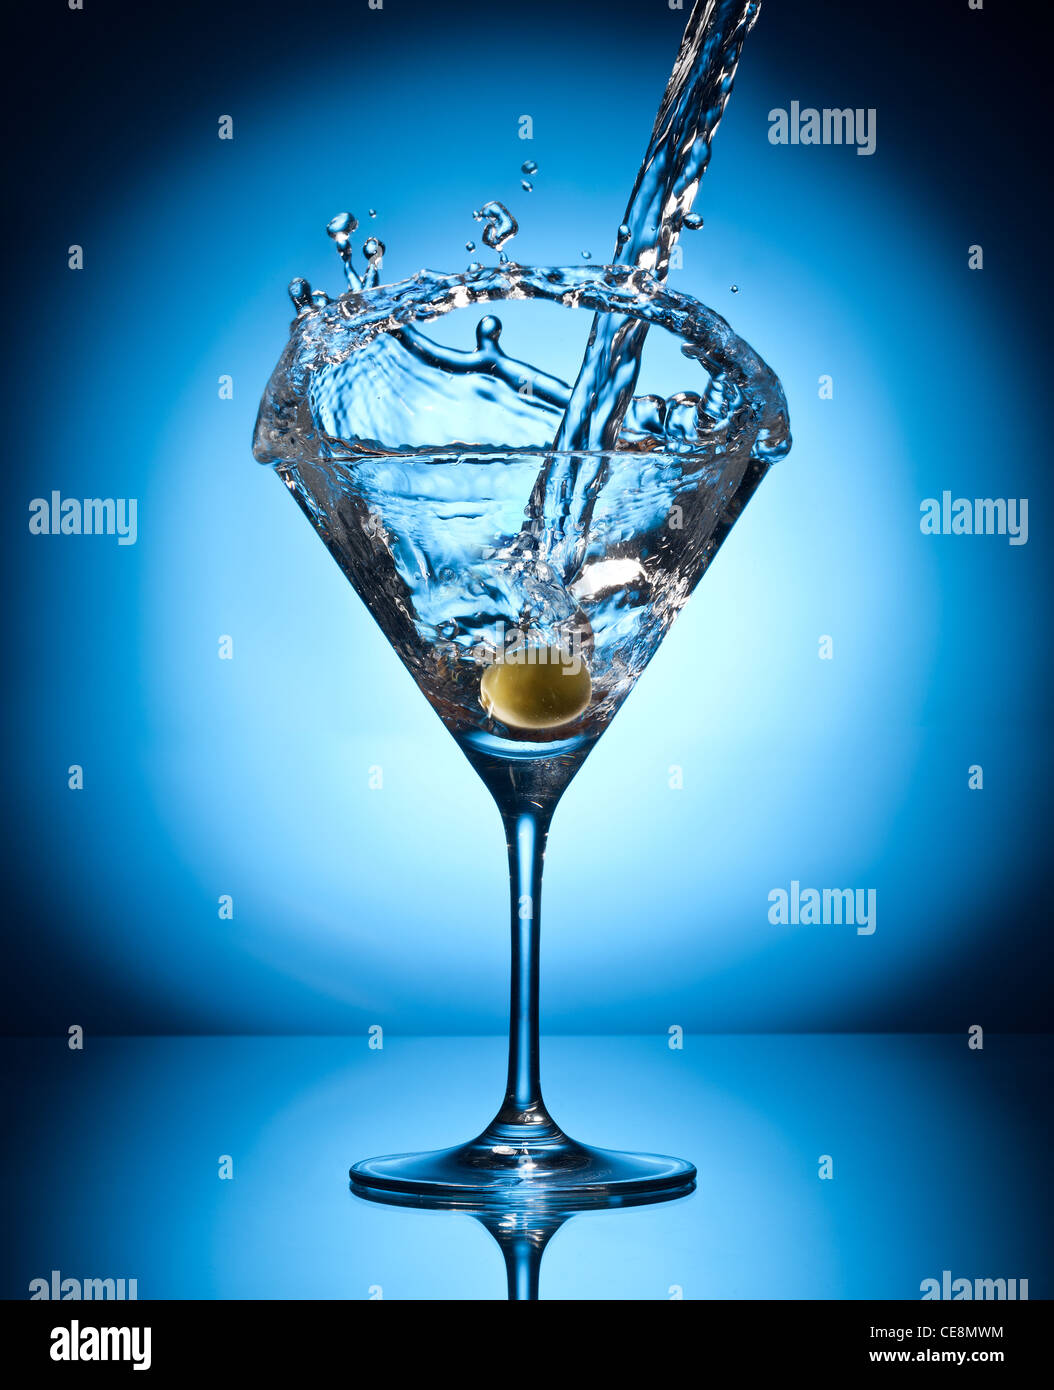 Splash martini from flying olives. Object on a blue background. Stock Photo